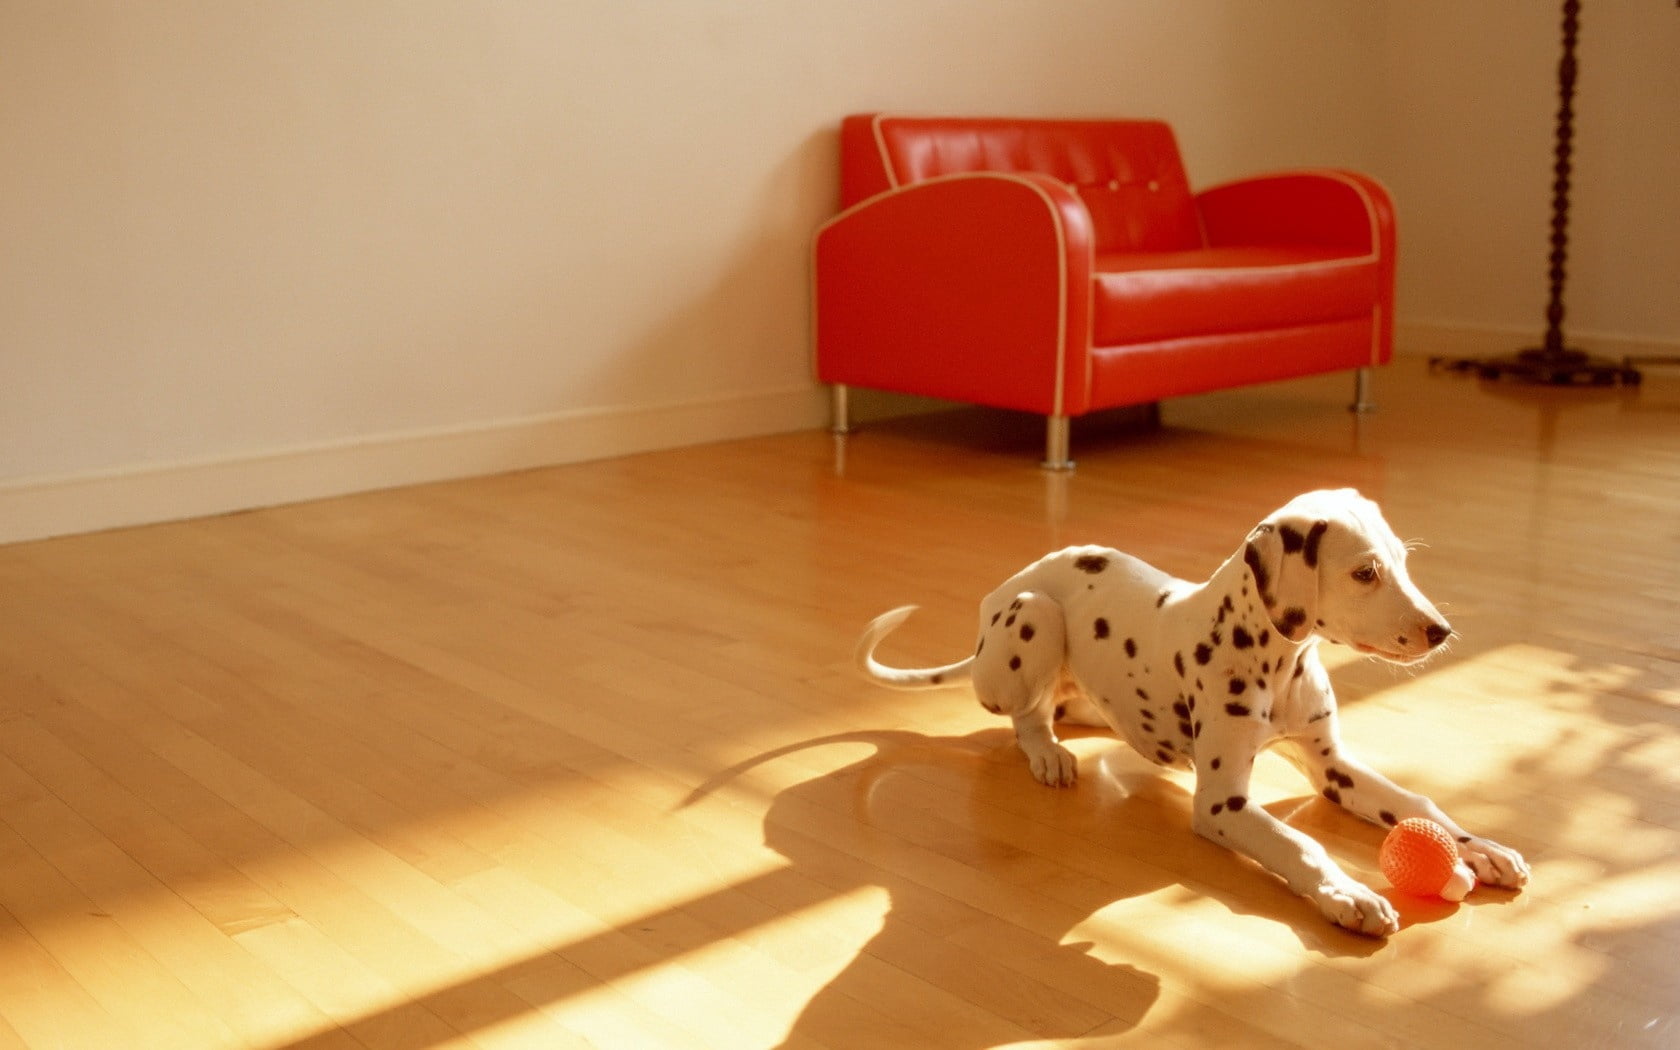 adult black and white Dalmatian, dog, room, floor, ball, toy